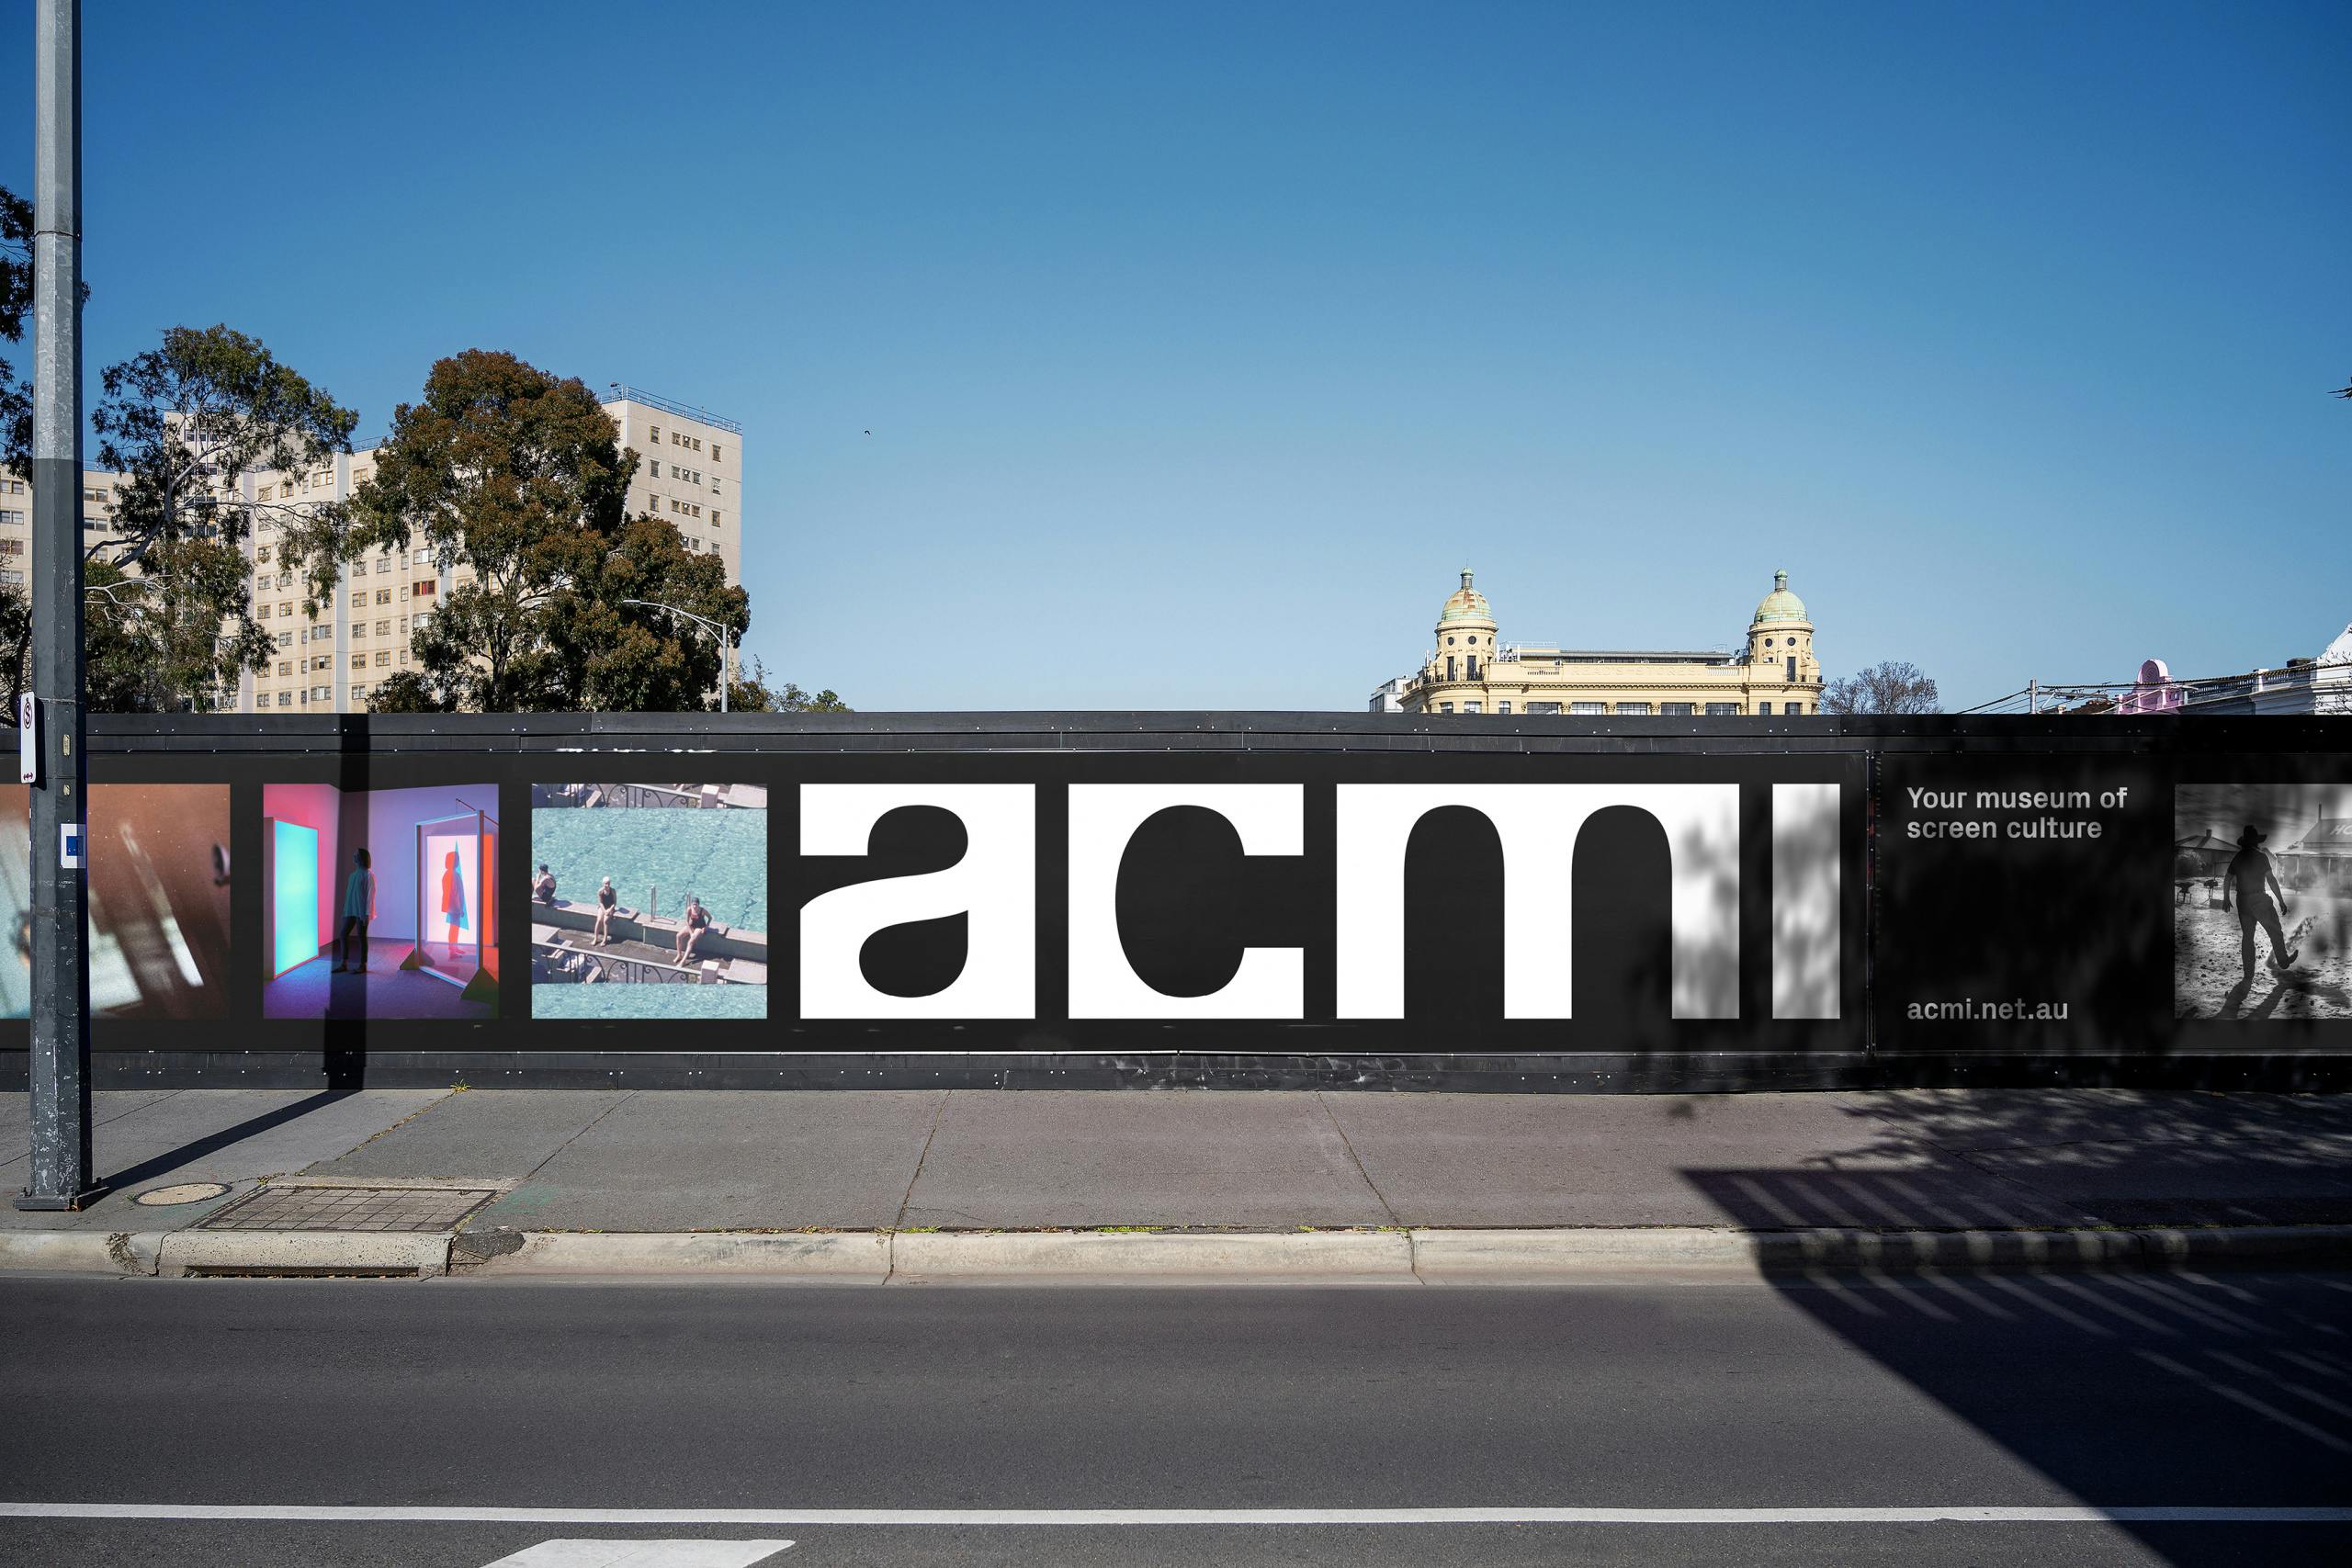 ACMI Recommends: Con Air  ACMI: Your museum of screen culture